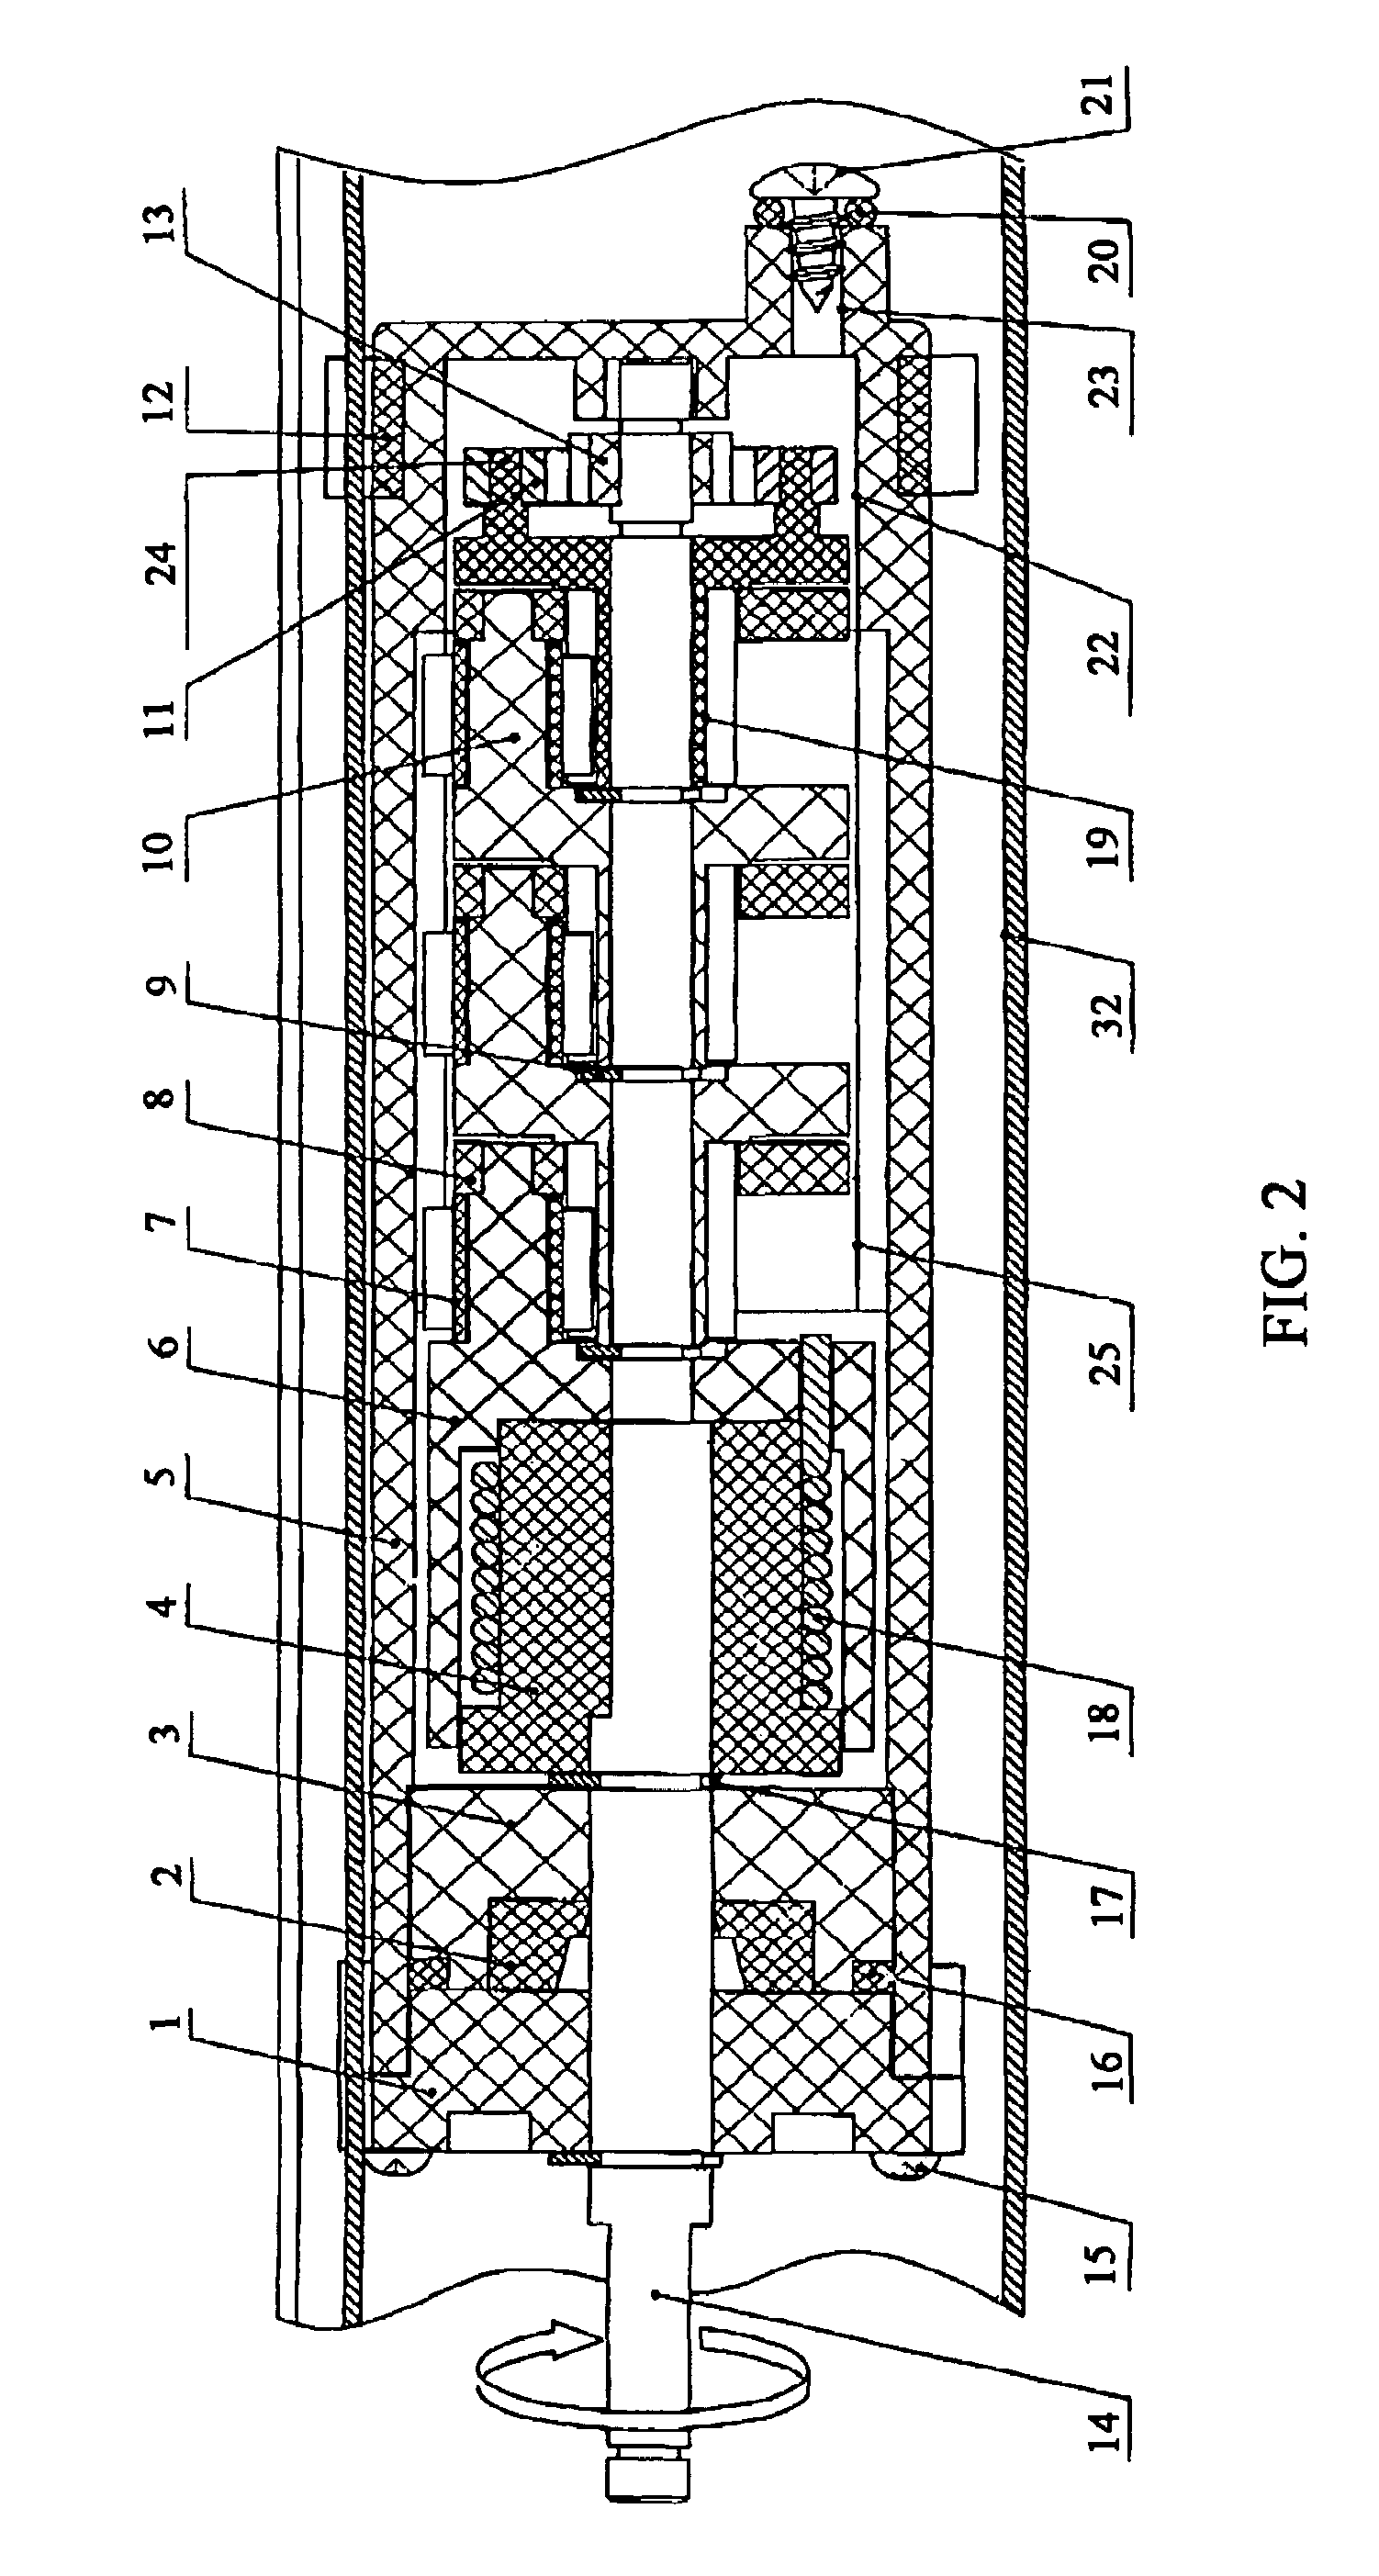 Decelerating and locking mechanism for a projection screen and the manually operated projection screen using the mechanism